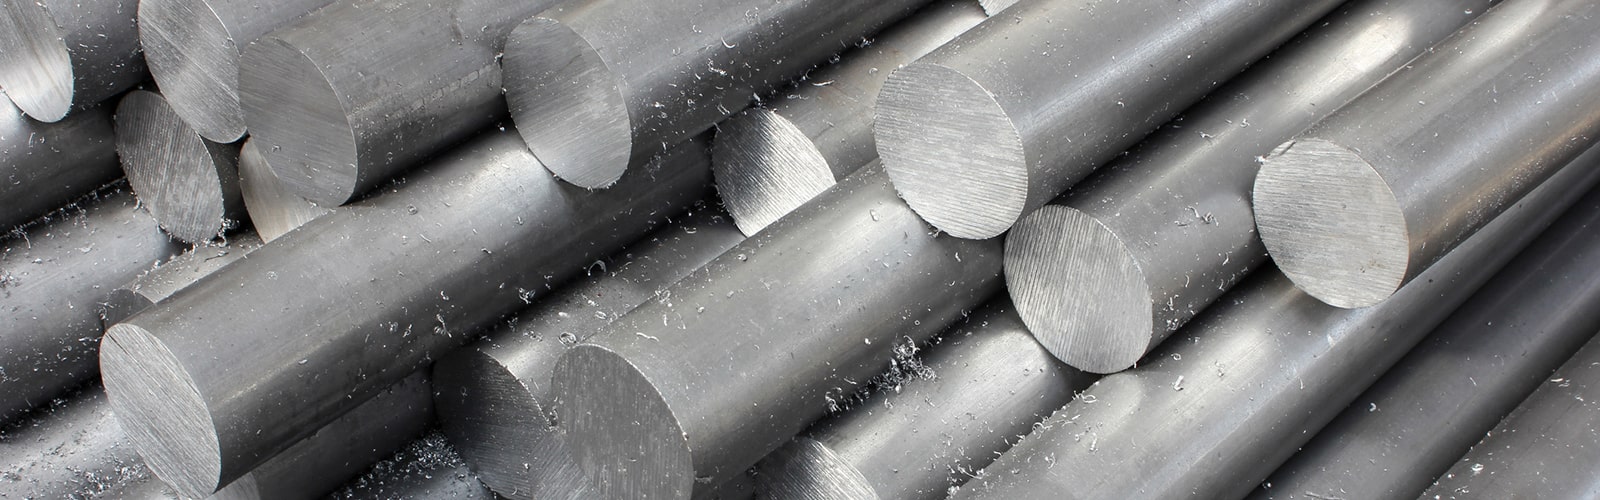 Aluminium: What is it used for? ﻿